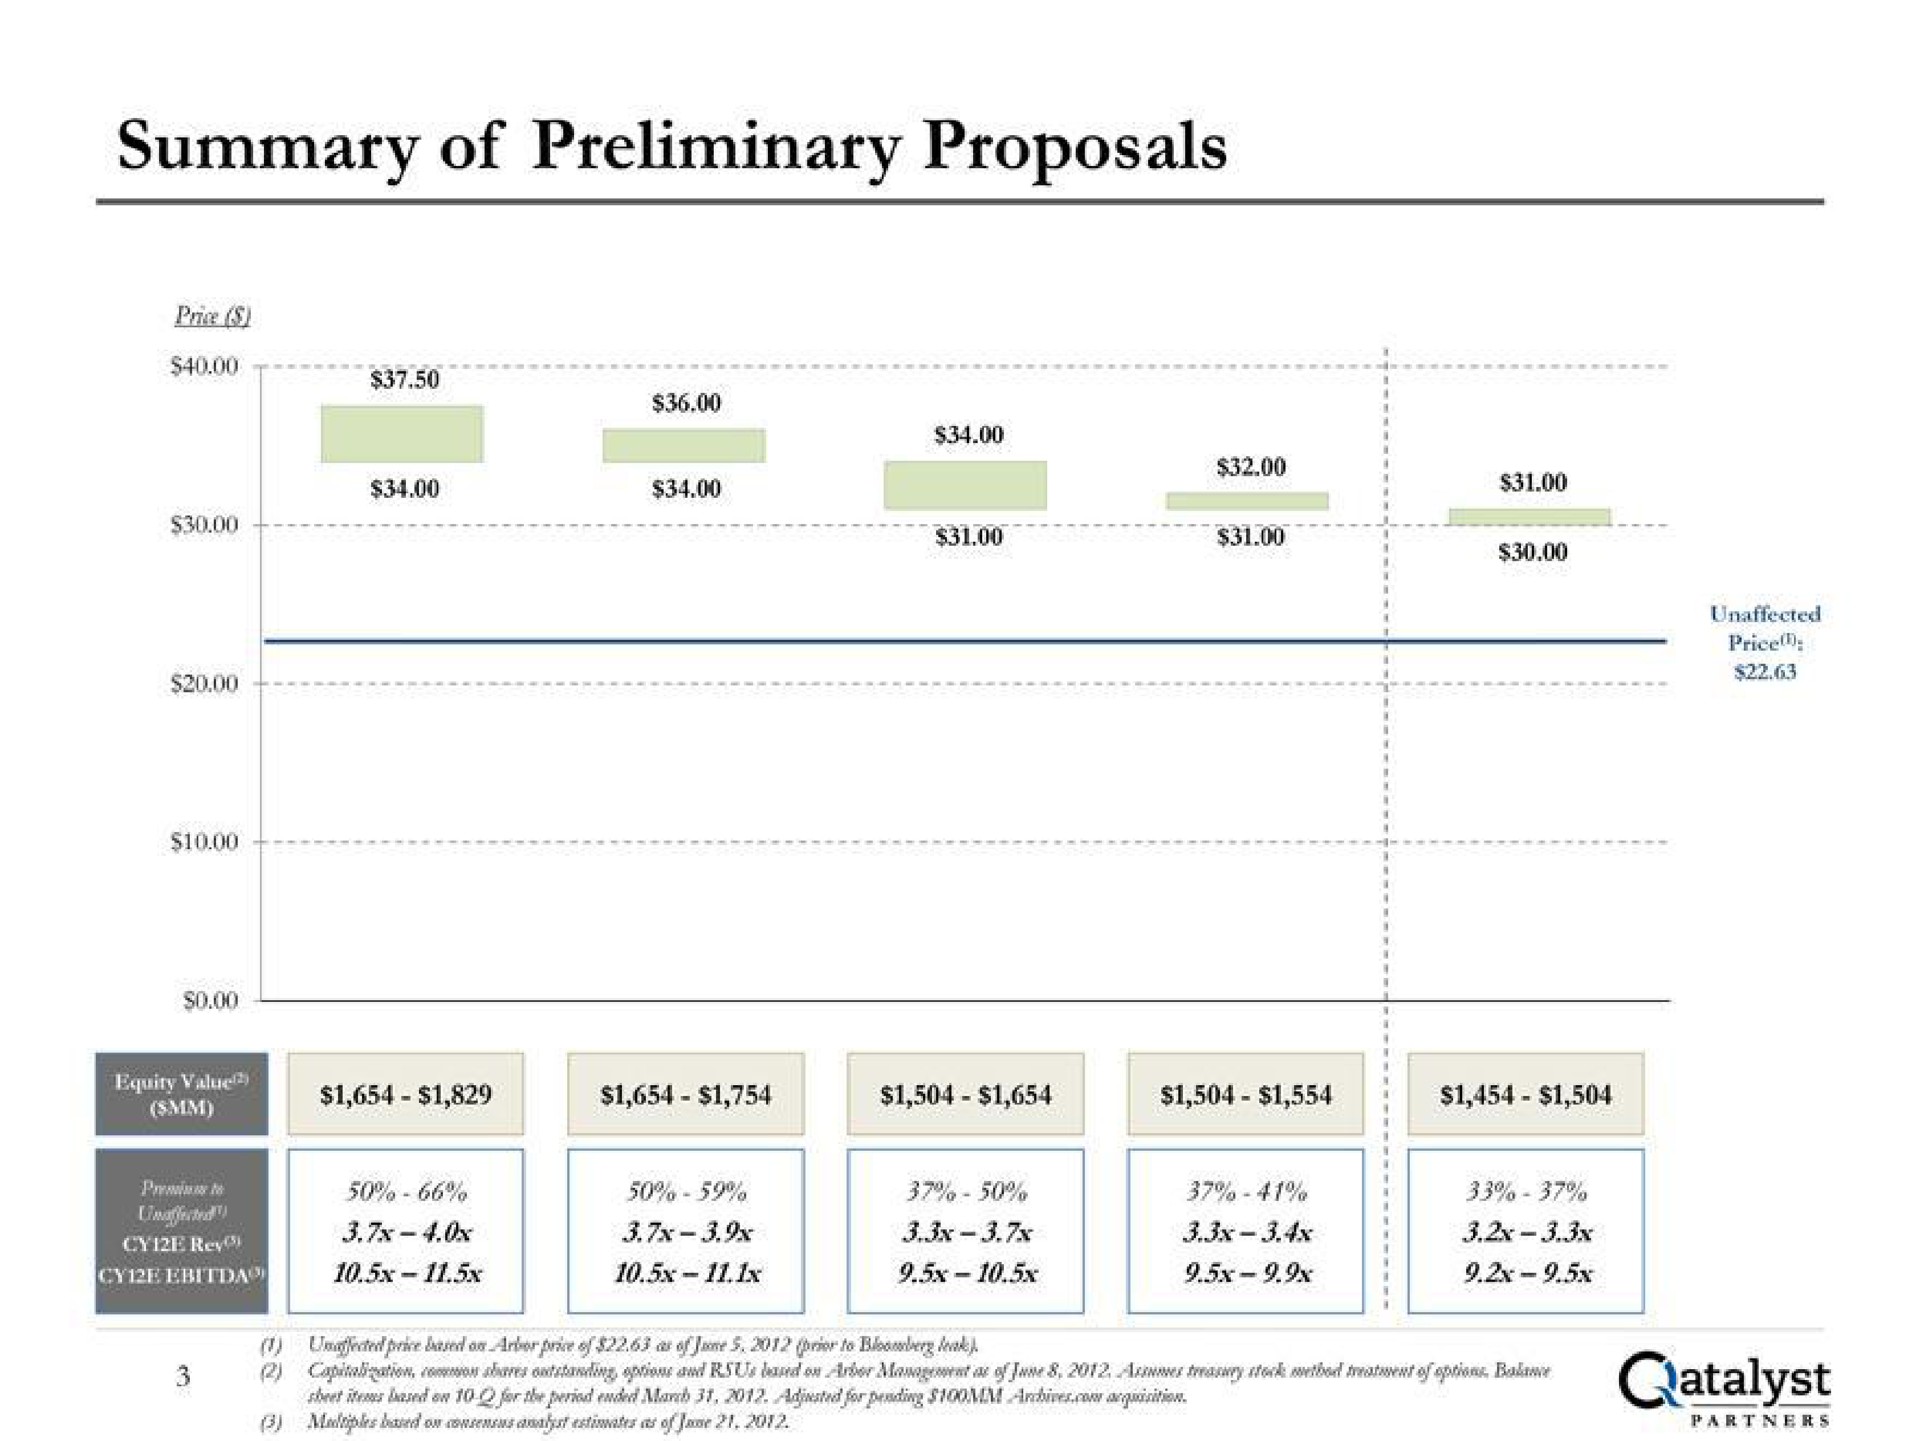 summary of preliminary proposals | Qatalyst Partners